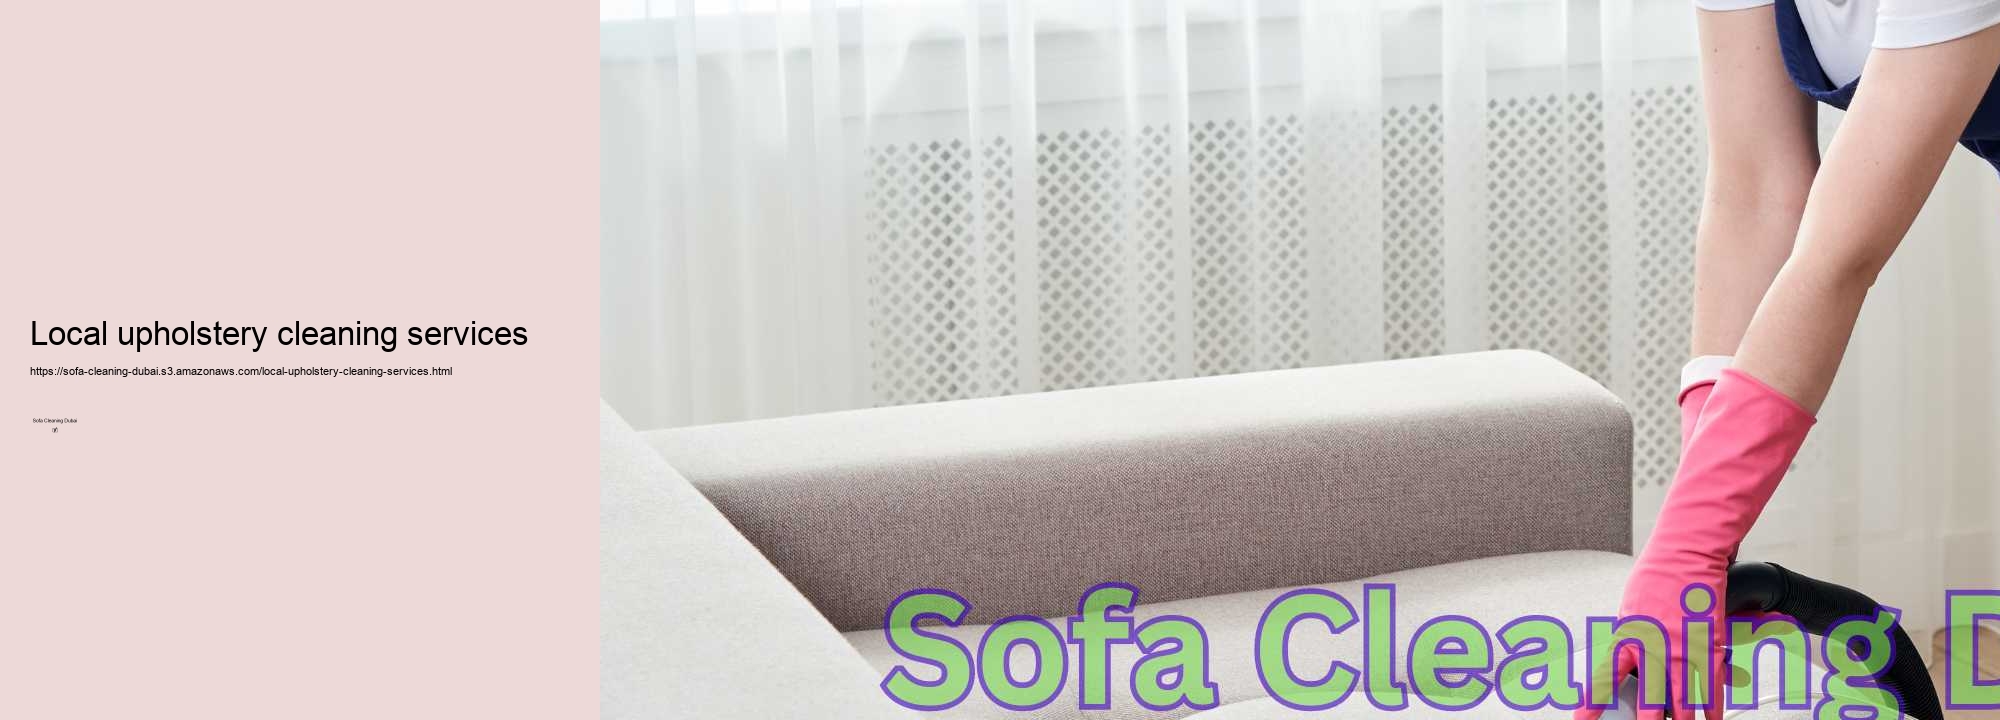 Local upholstery cleaning services